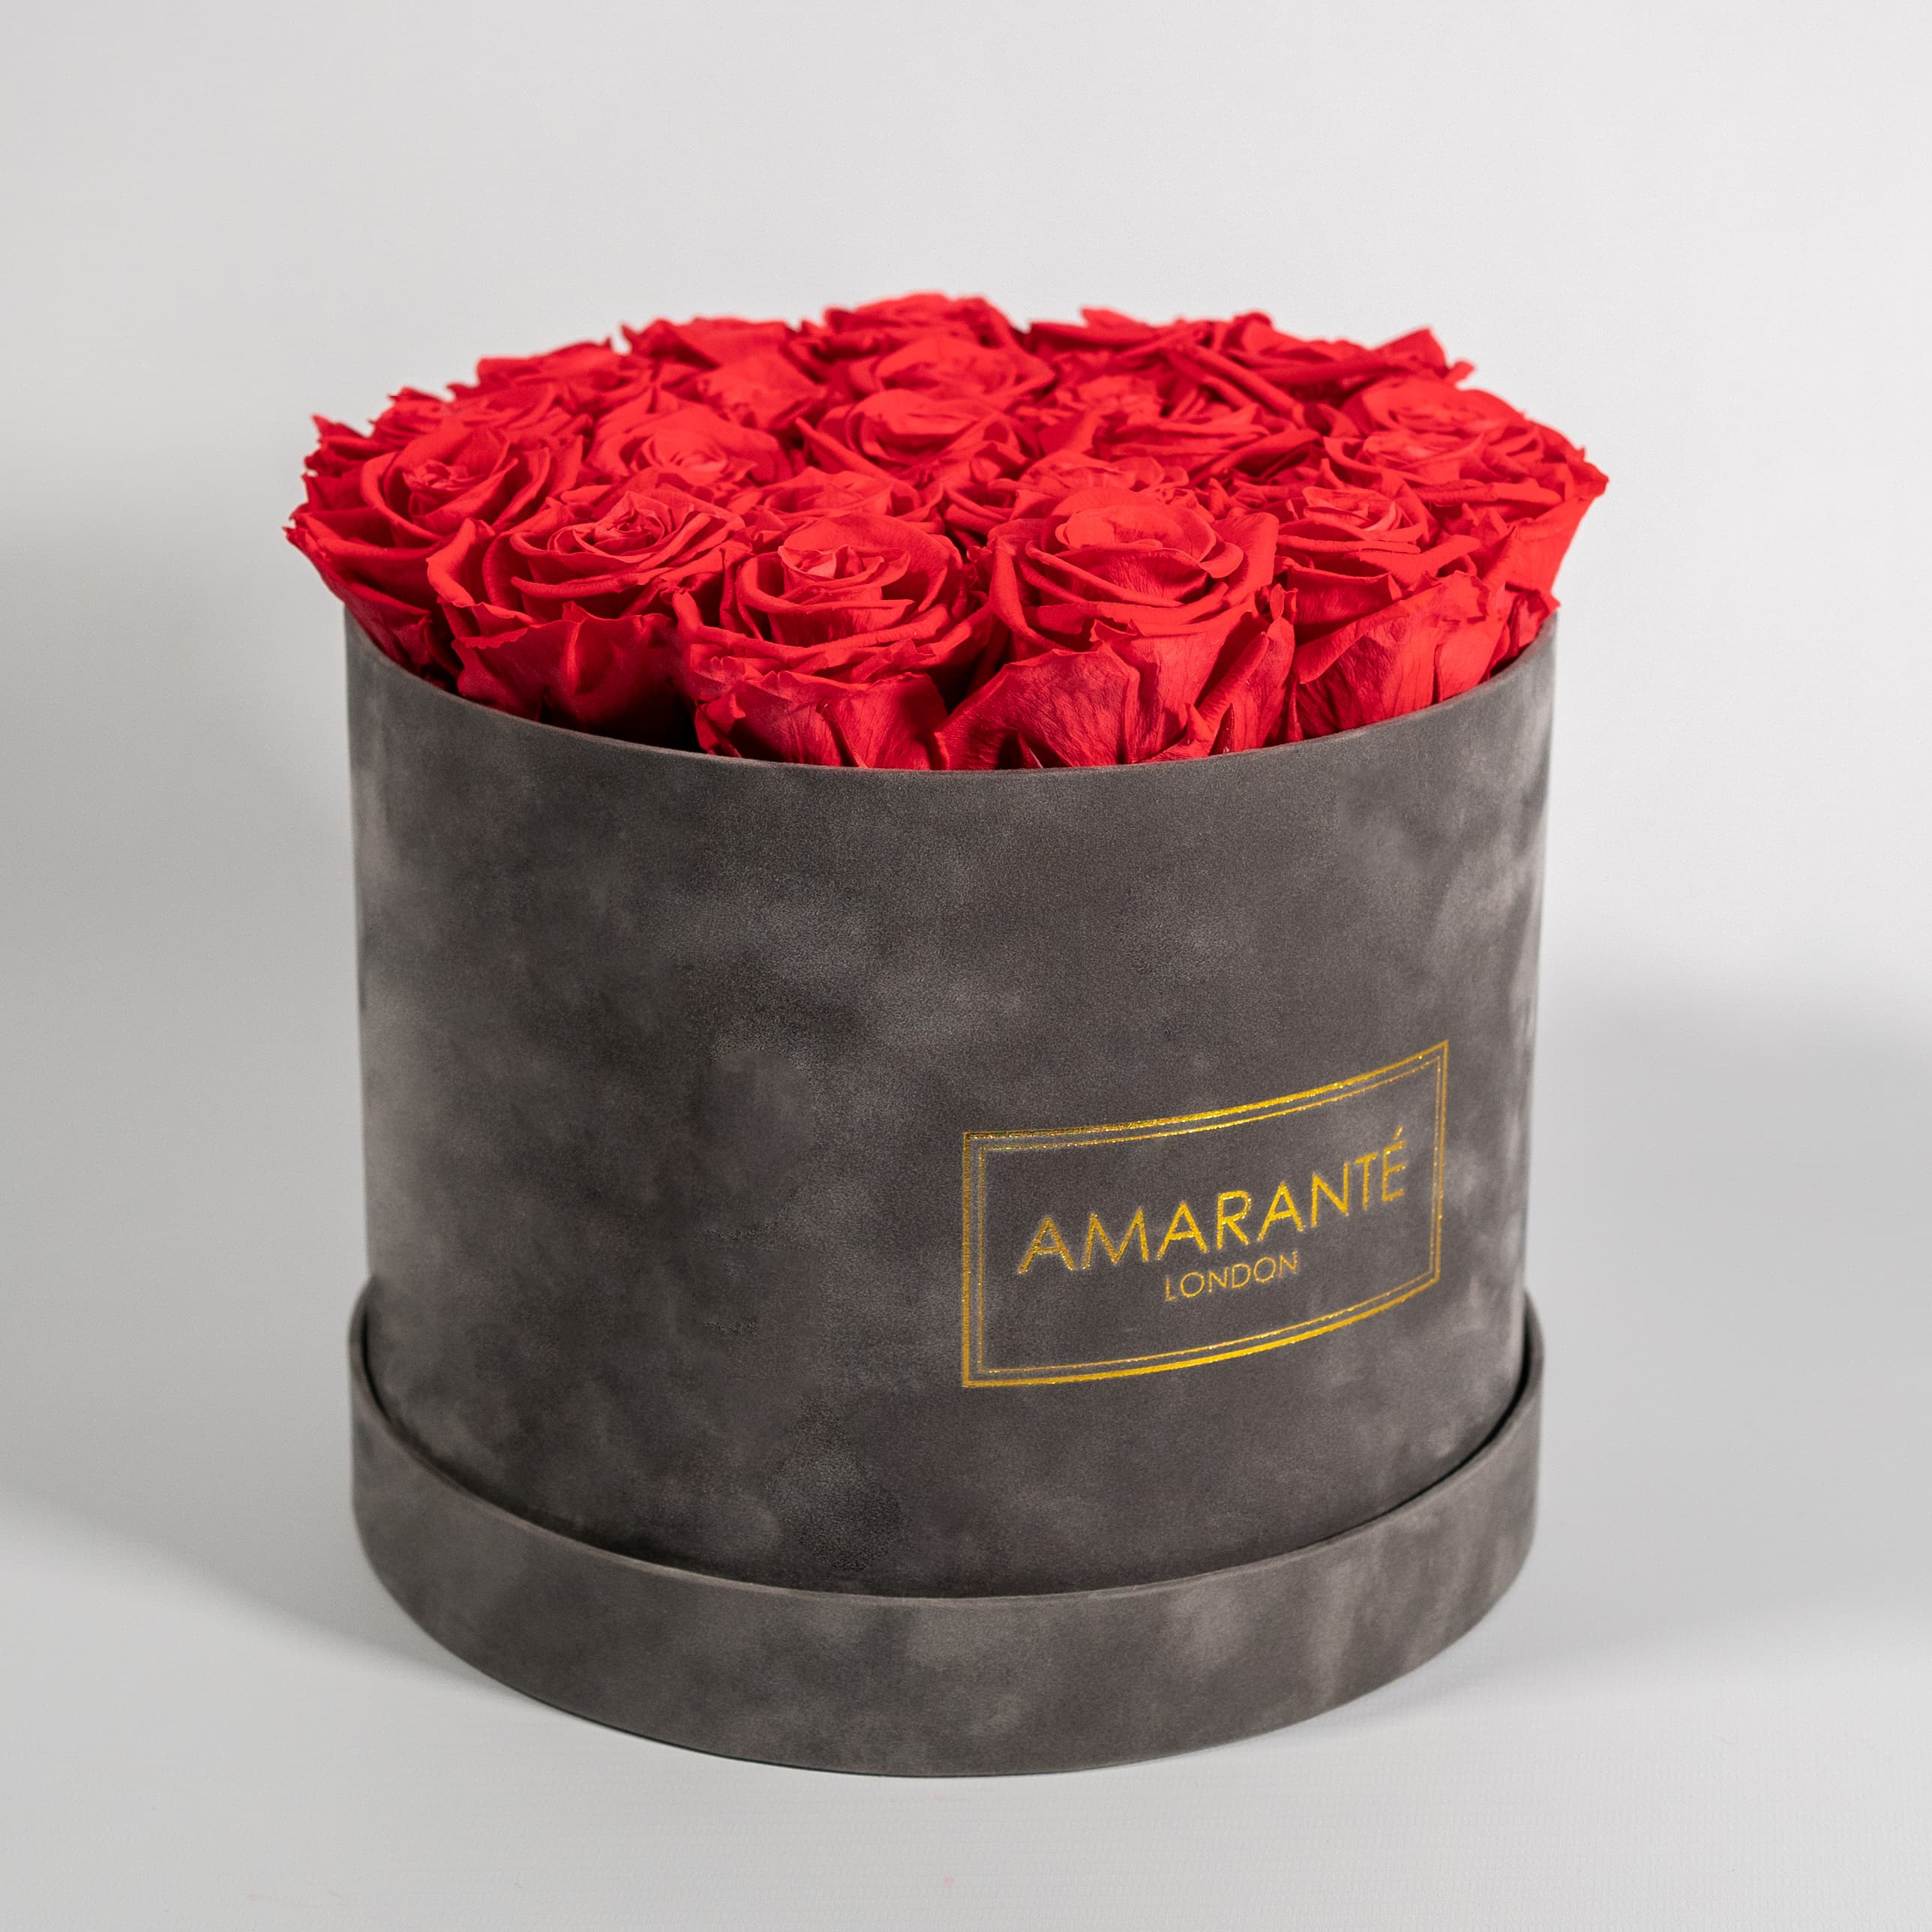 Chic red Roses displayed in a stunning grey box 